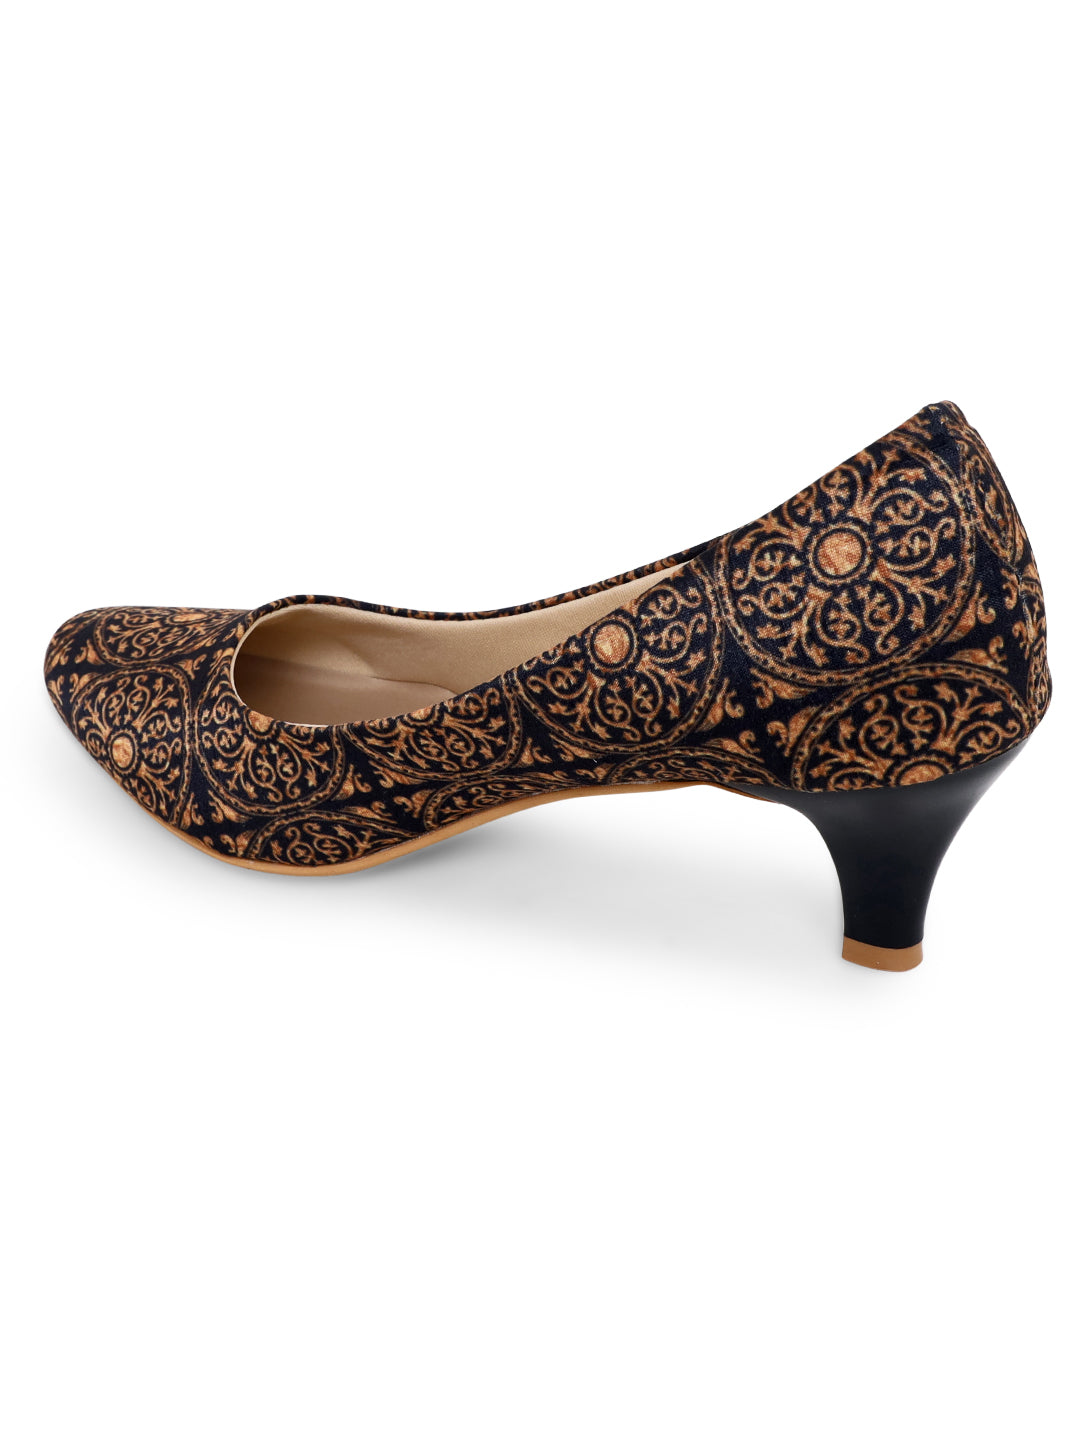 Synthetic Leather Ethnic Wear High Heel Sandal at Rs 240/pair in New Delhi  | ID: 2851551376712